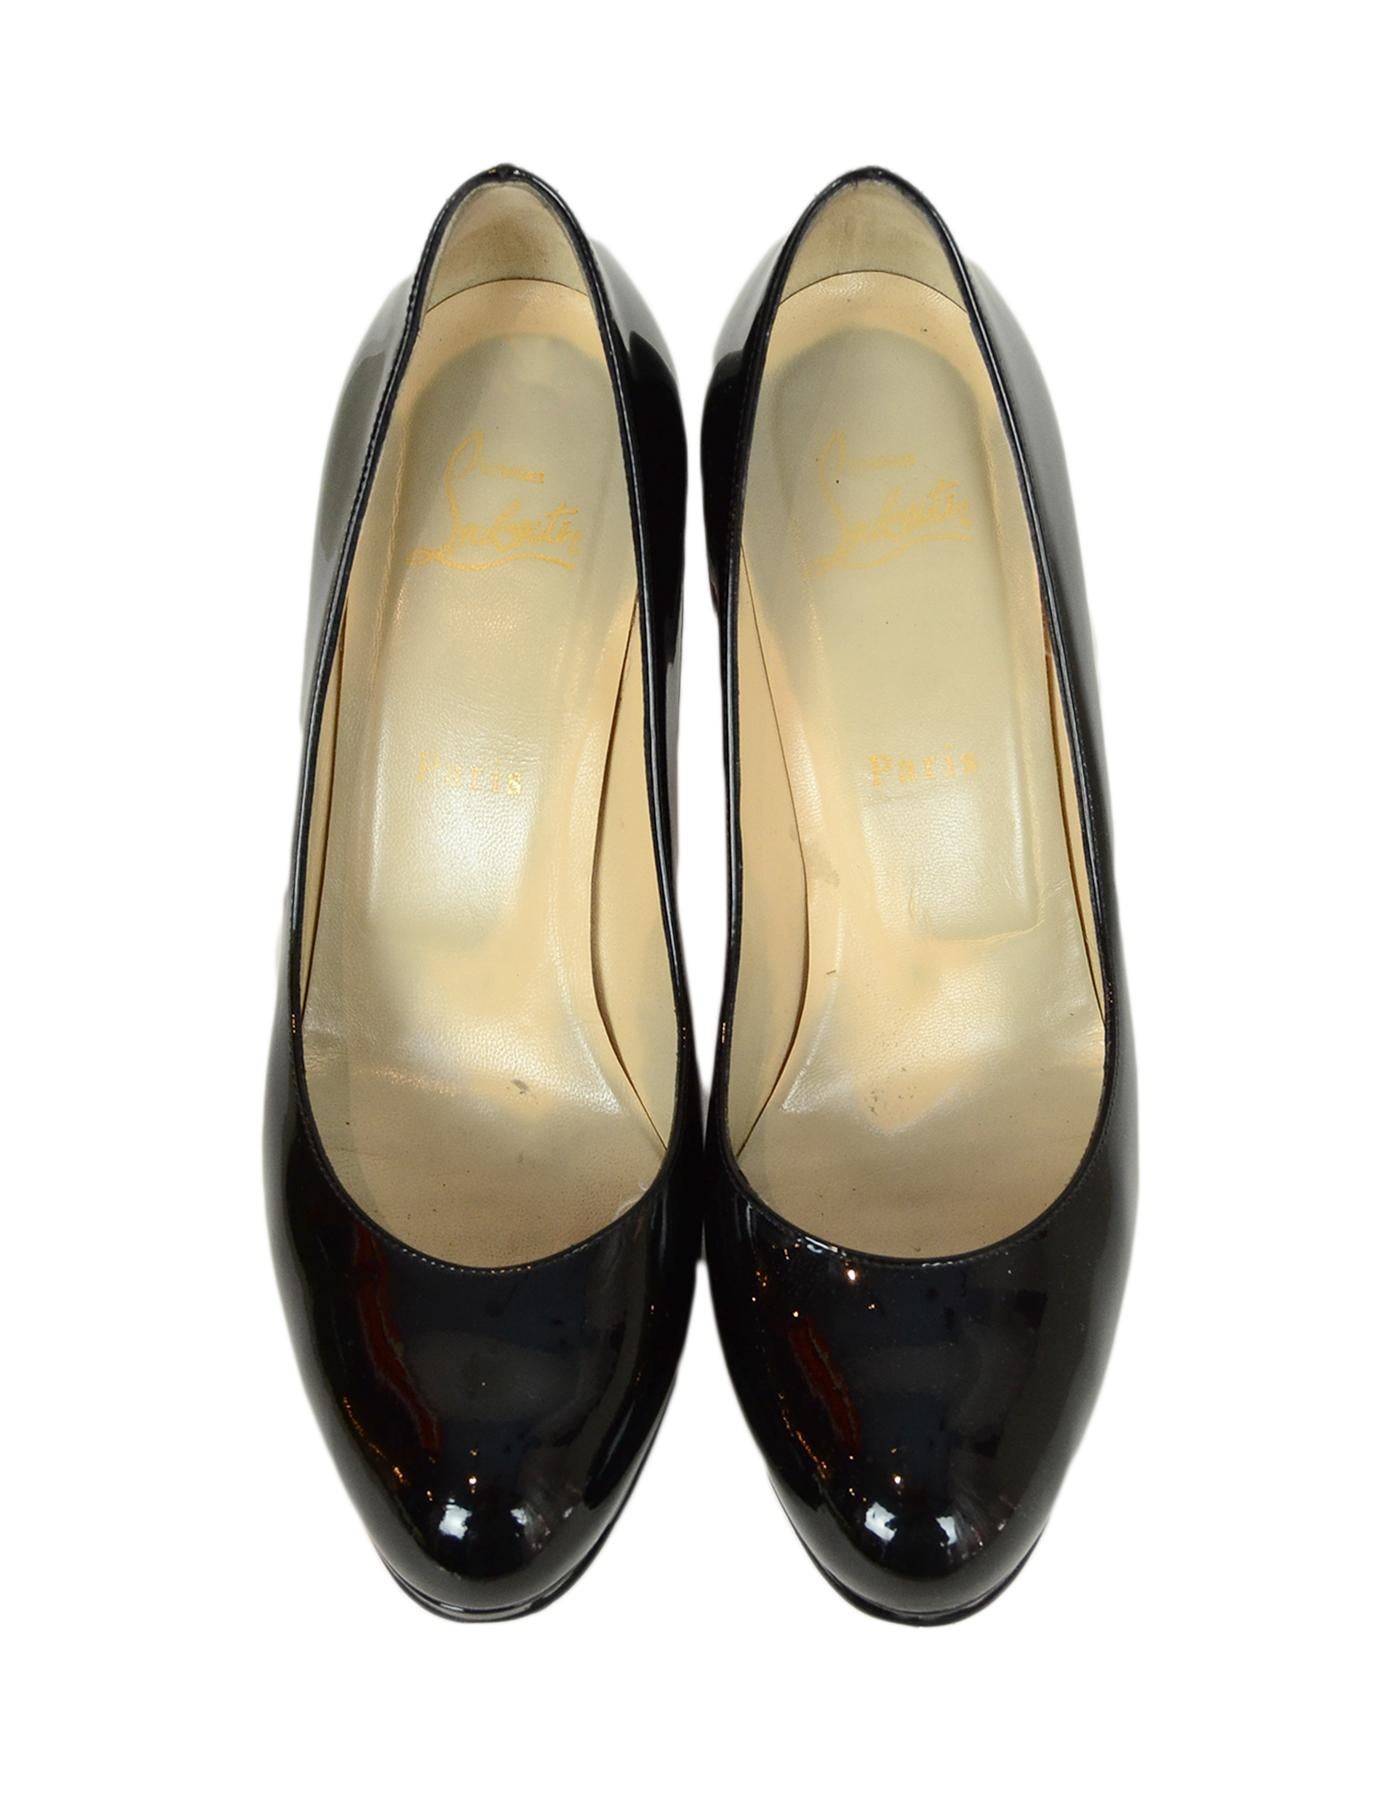 Christian Louboutin Black Patent Leather New Simple 100 Pumps sz 38.5 rt. $795 In Good Condition In New York, NY